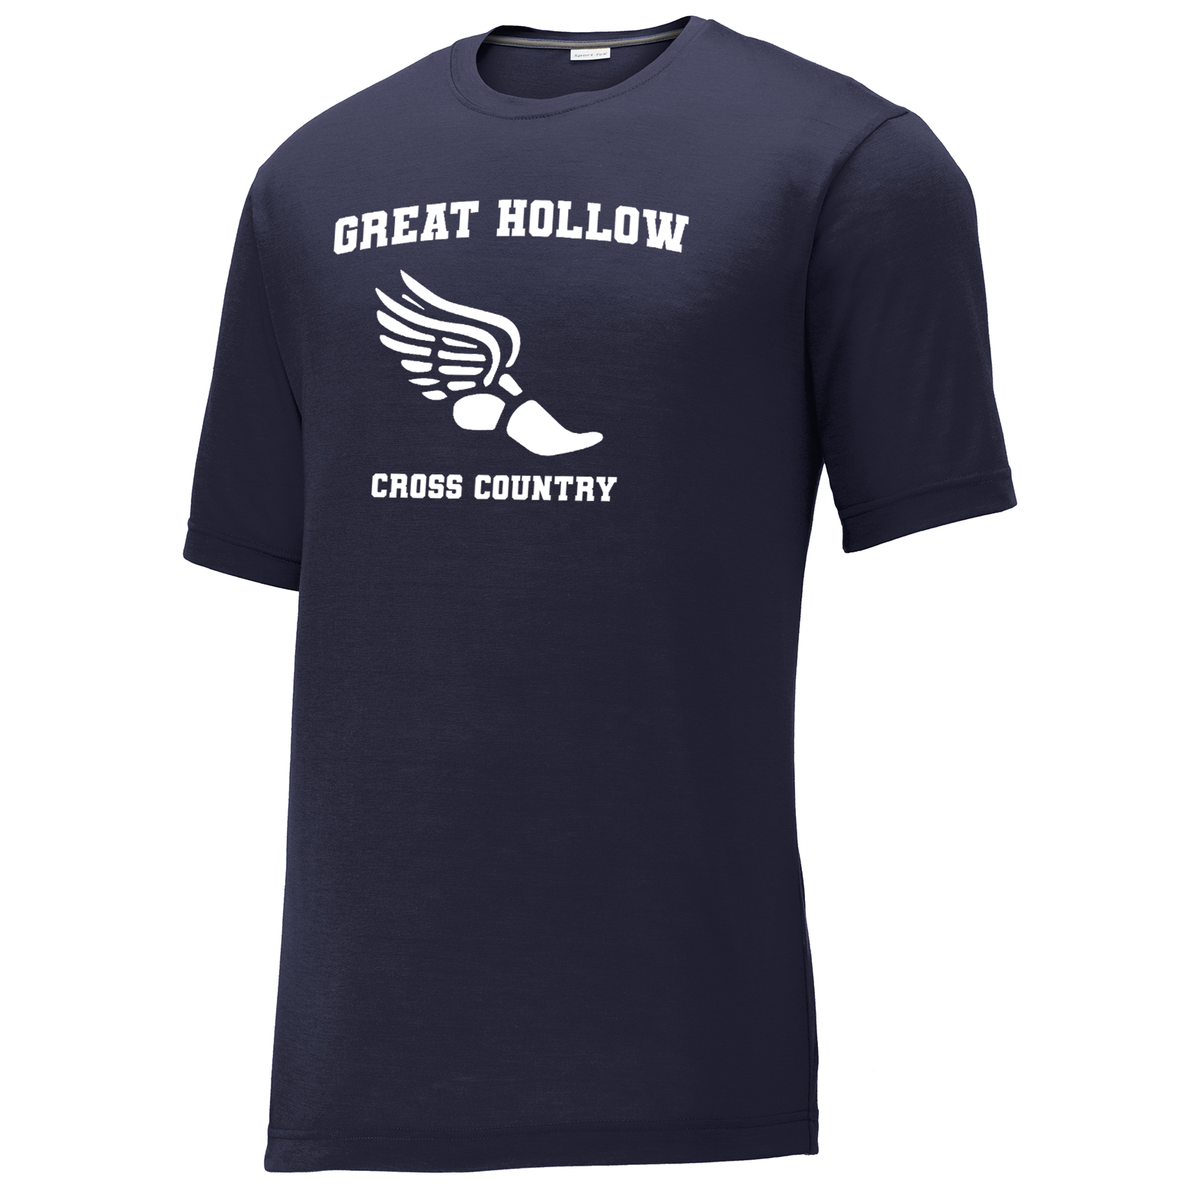 Great Hollow Cross Country CottonTouch Performance T-Shirt